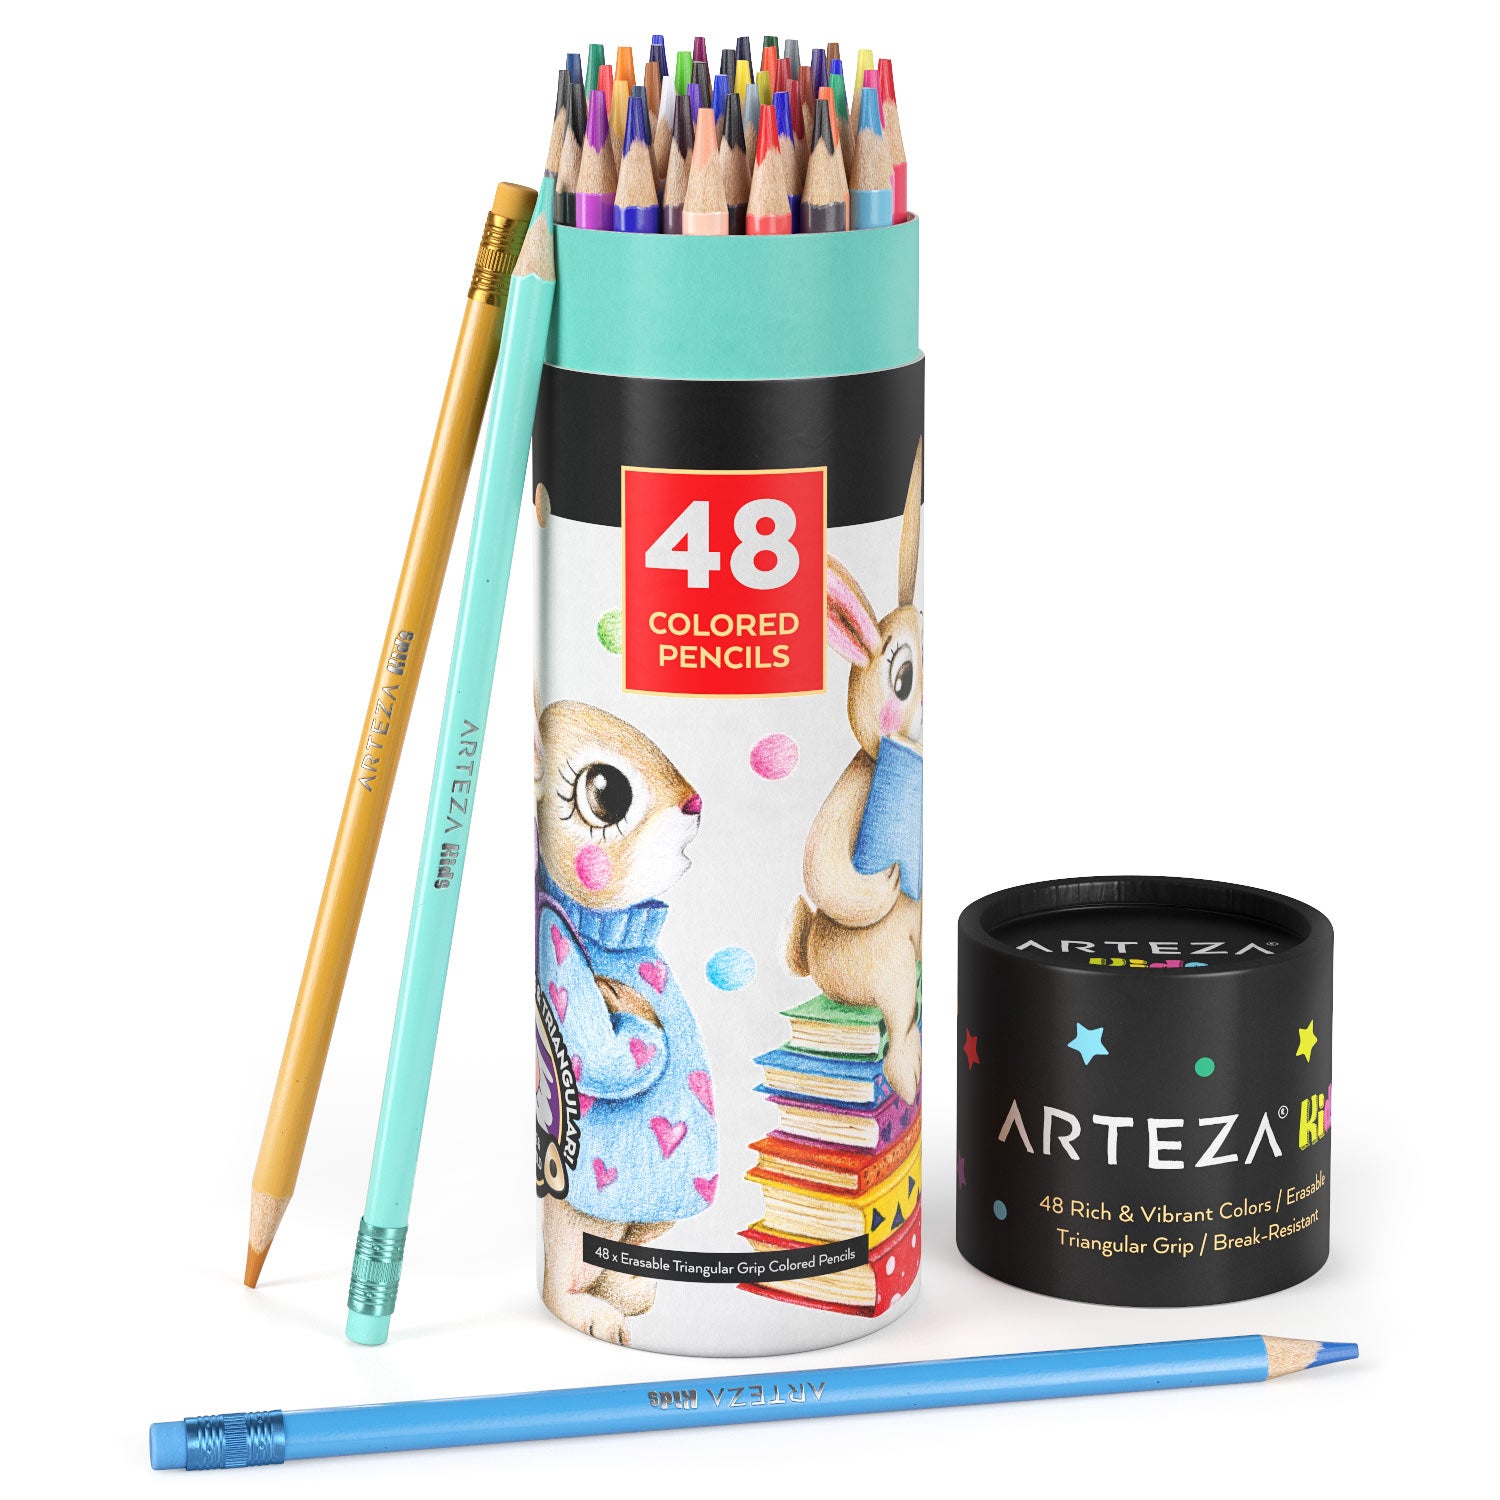 Colouring pencils for kids, students and artists